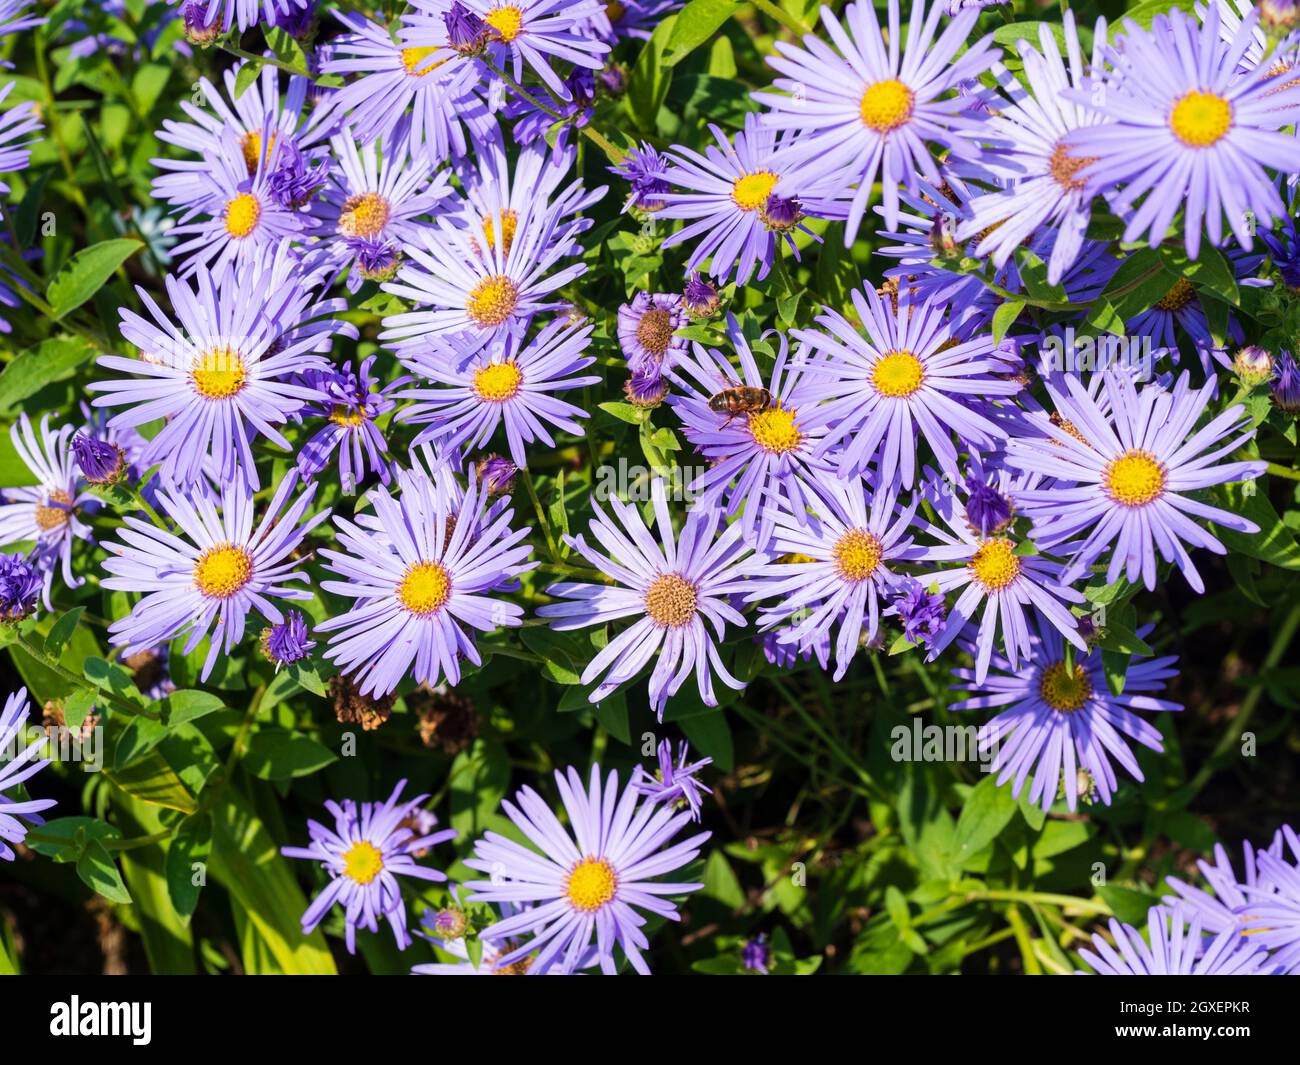 Massed blue daisies of the summer to autumn flowering hardy perennial, Aster frikartii 'Monch' Stock Photo